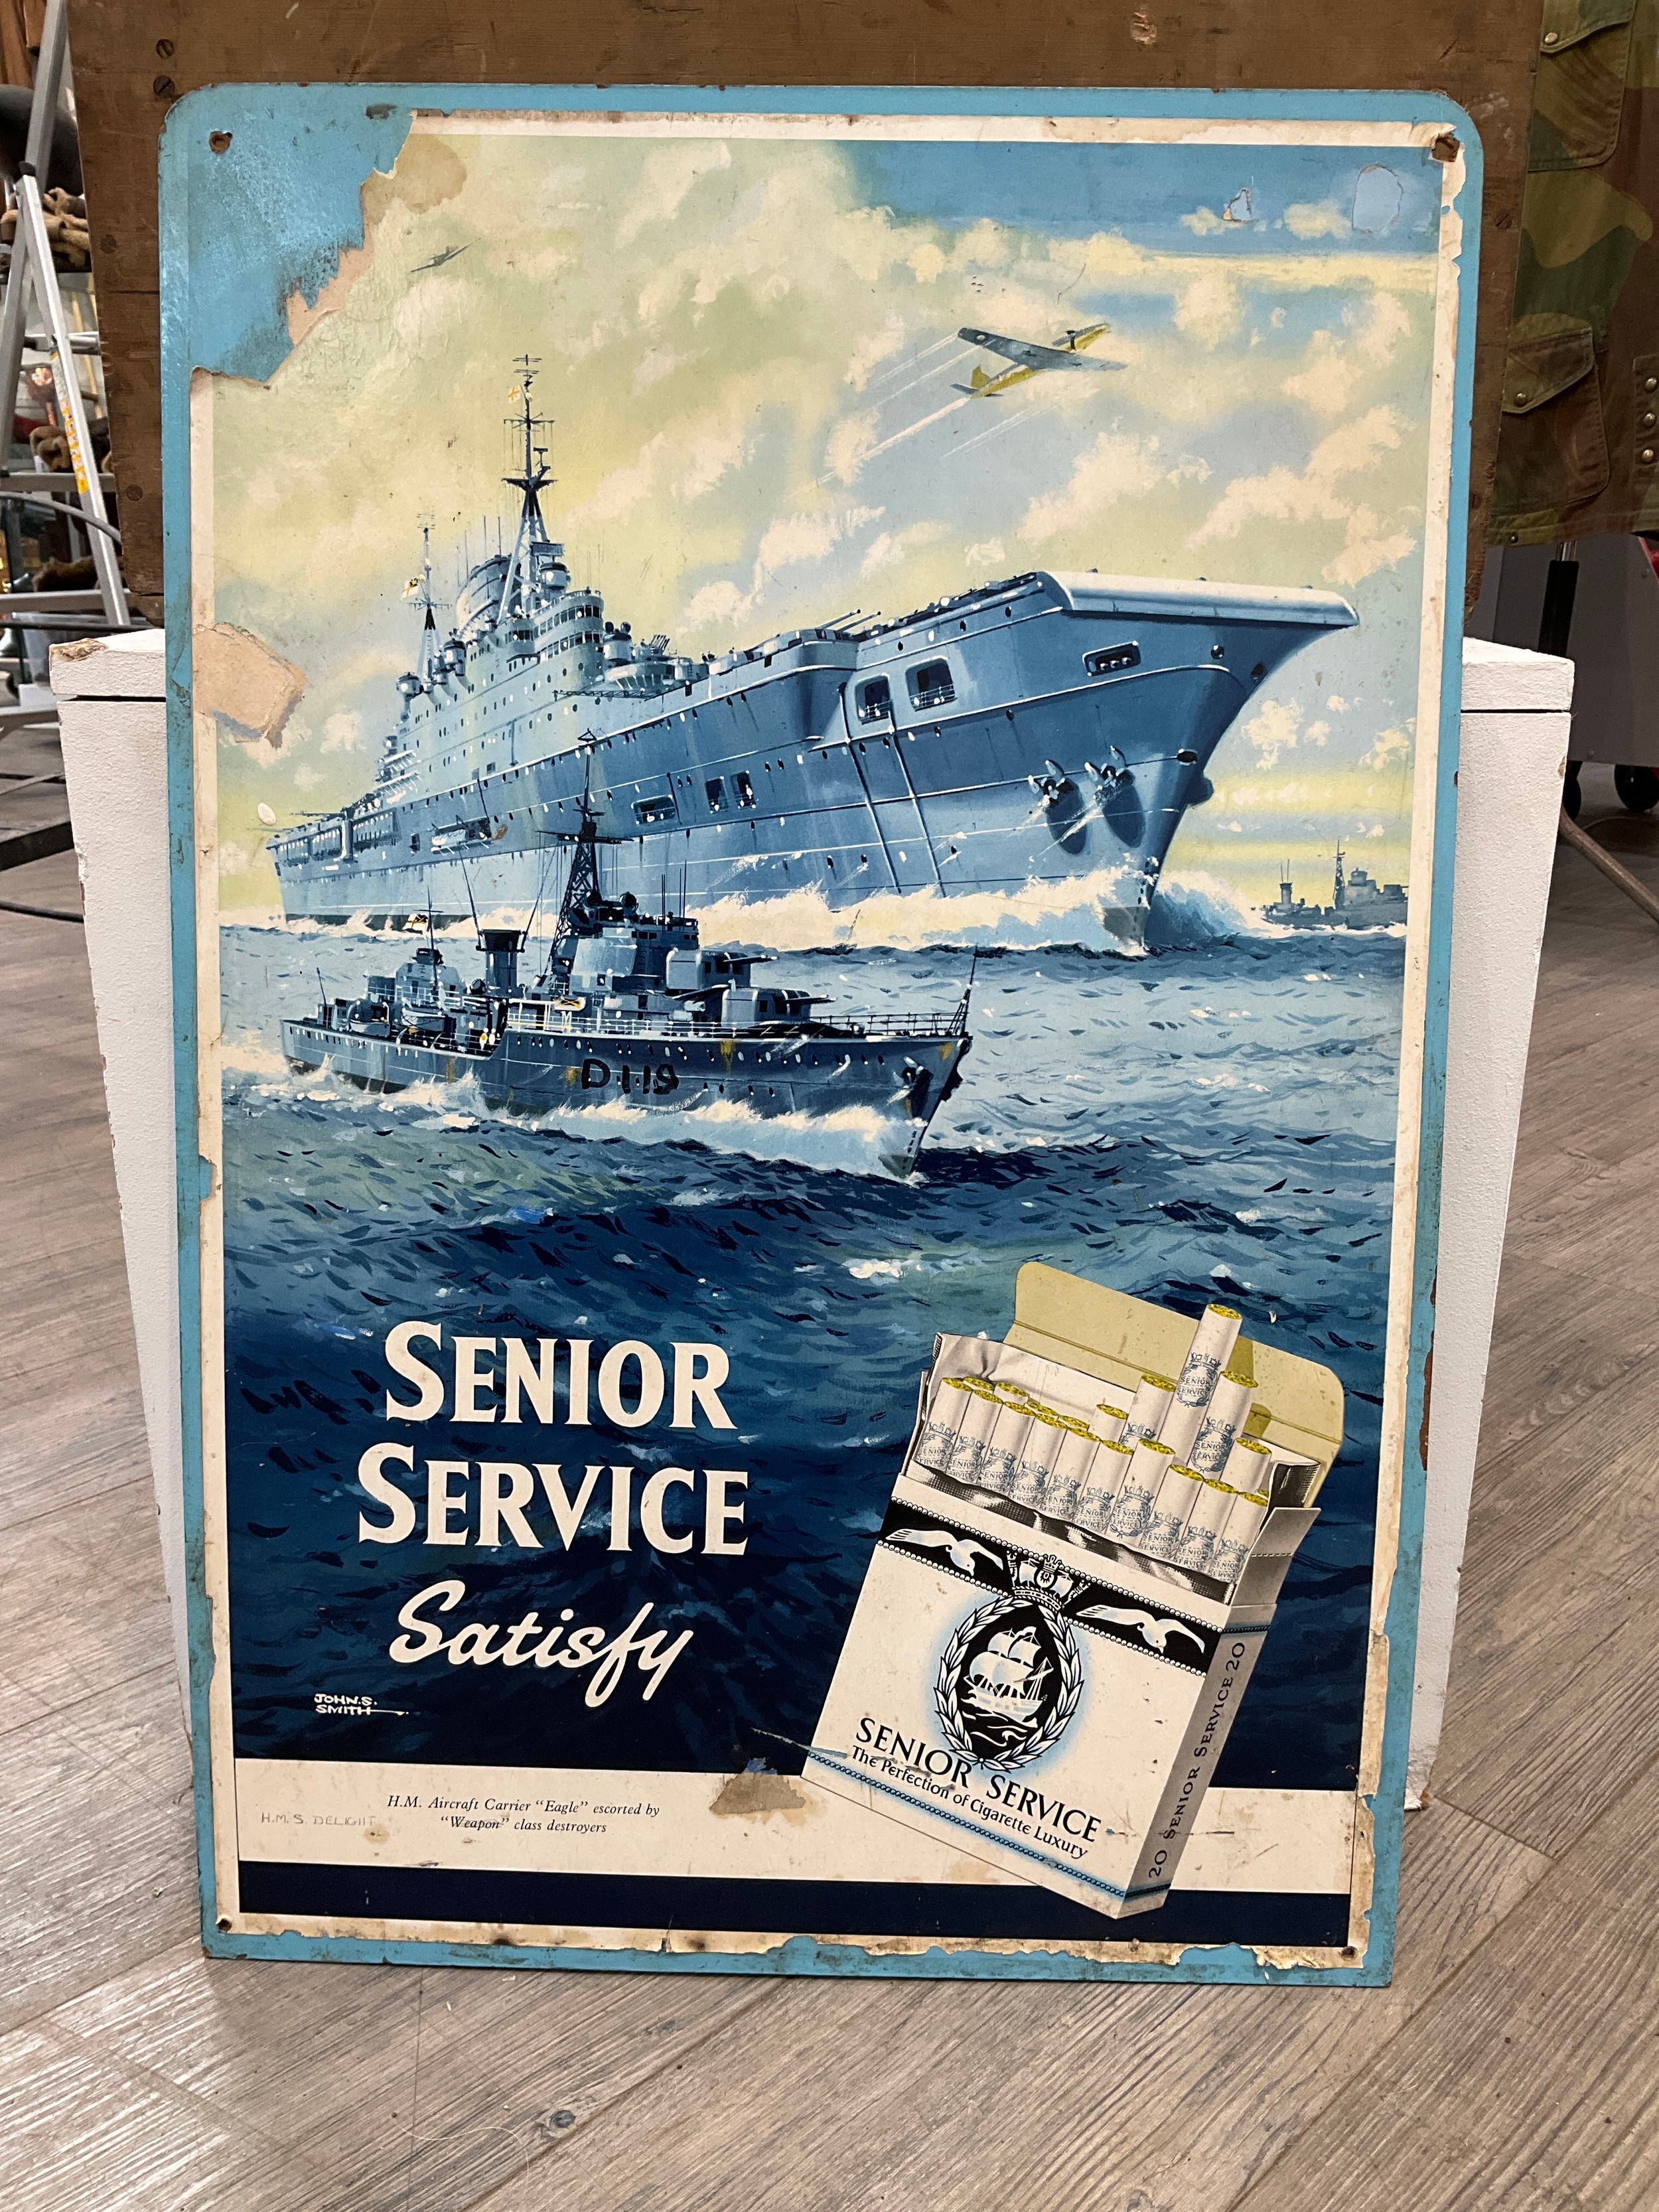 A Senior Service advertising poster by John S. Smith, design of aircraft carrier HMS Eagle, some